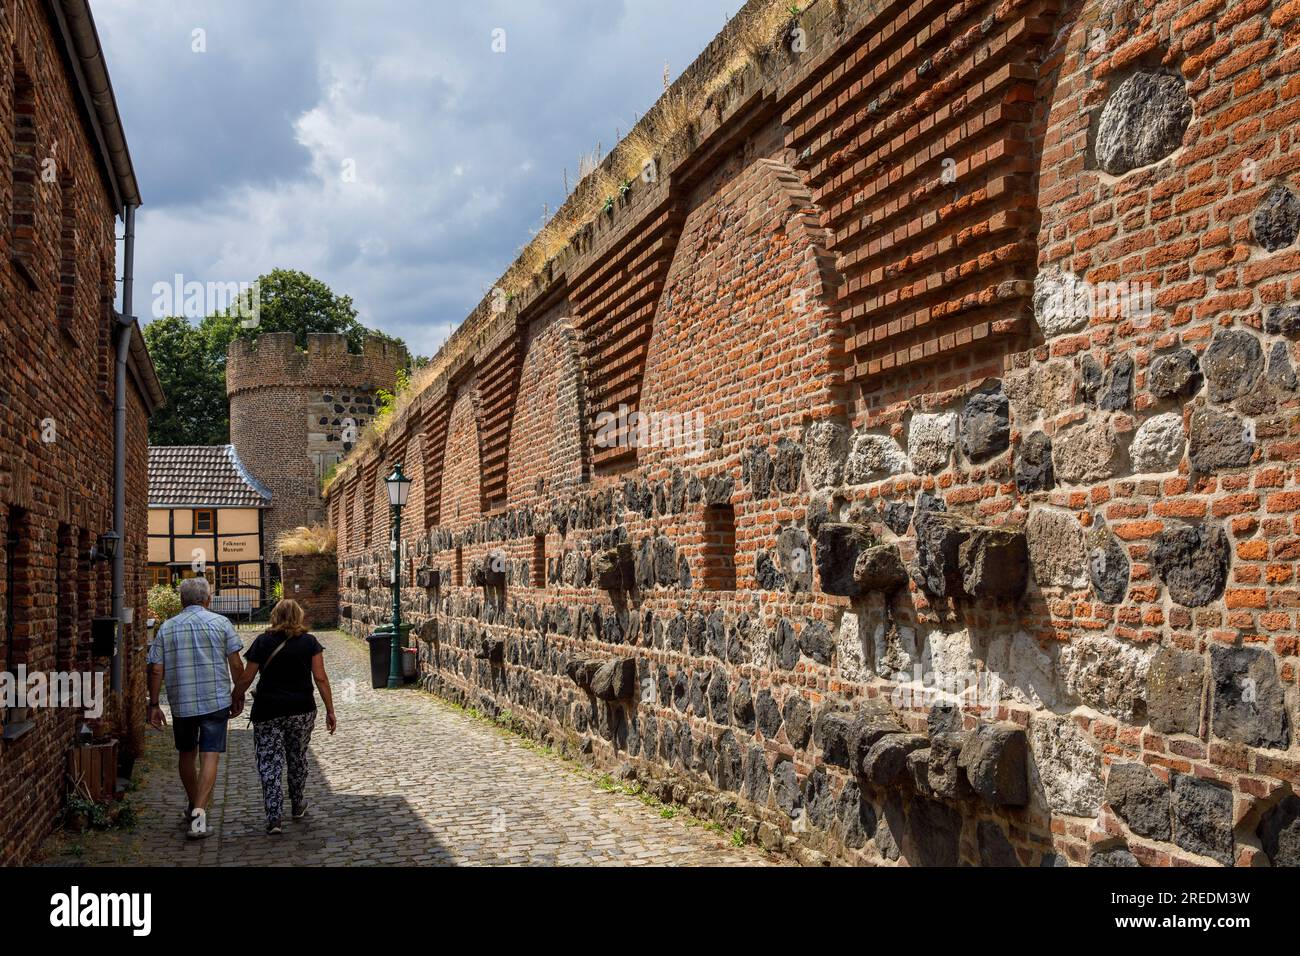 the old nothern town wall on Mauer street in Zons on the river Rhine, in the back the Kroetschen tower, North Rhine-Westphalia, Germany die alte noerd Stock Photo